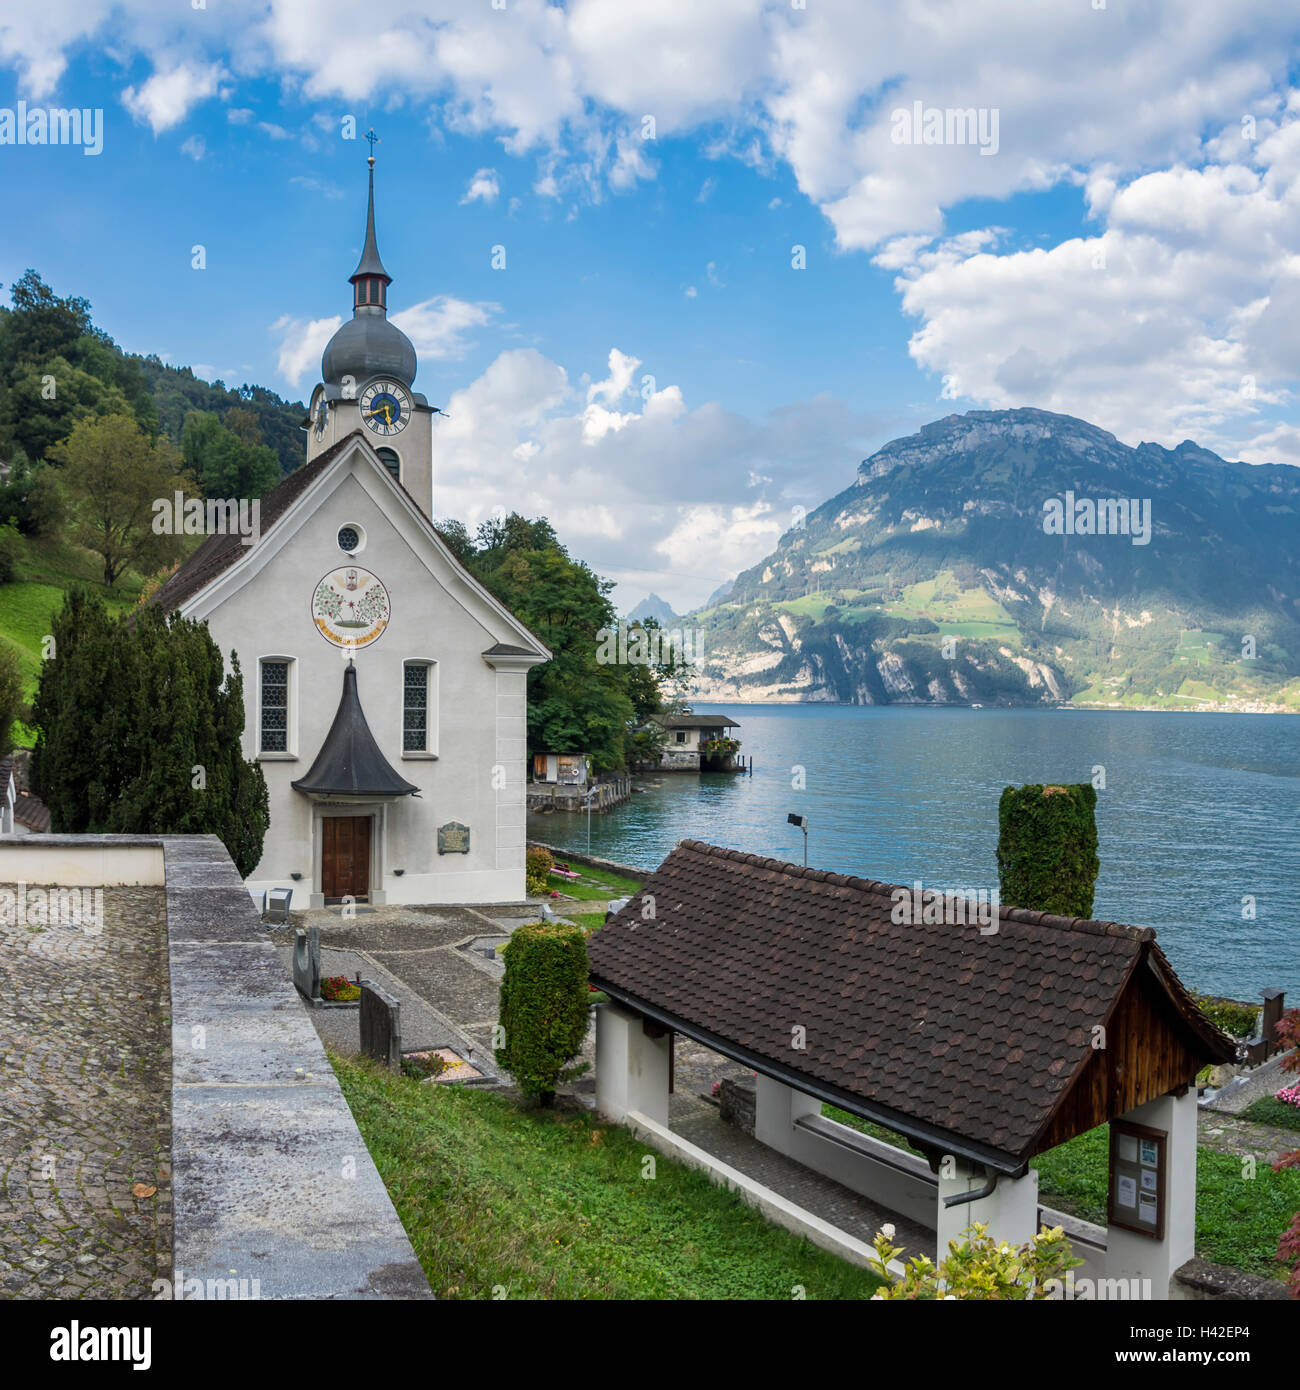 Panoramic view of the church of Bauen, a small village in central Switzerland on the shore of Lake Lucerne (Vierwaldstättersee). Stock Photo